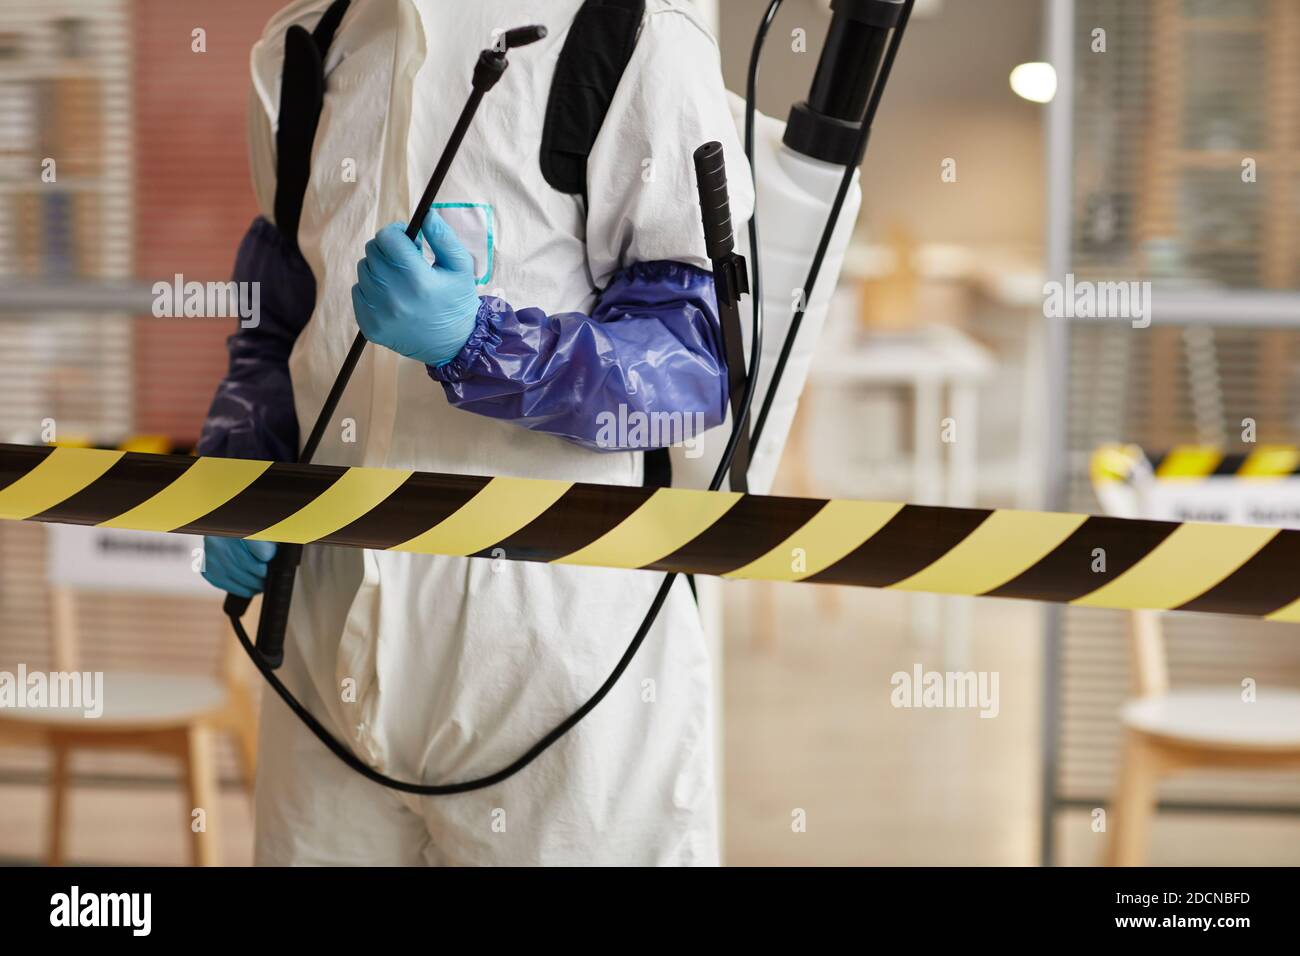 Cropped portrait of unrecognizable disinfection worker wearing full protective gear standing behind danger line while sanitizing office, copy space Stock Photo